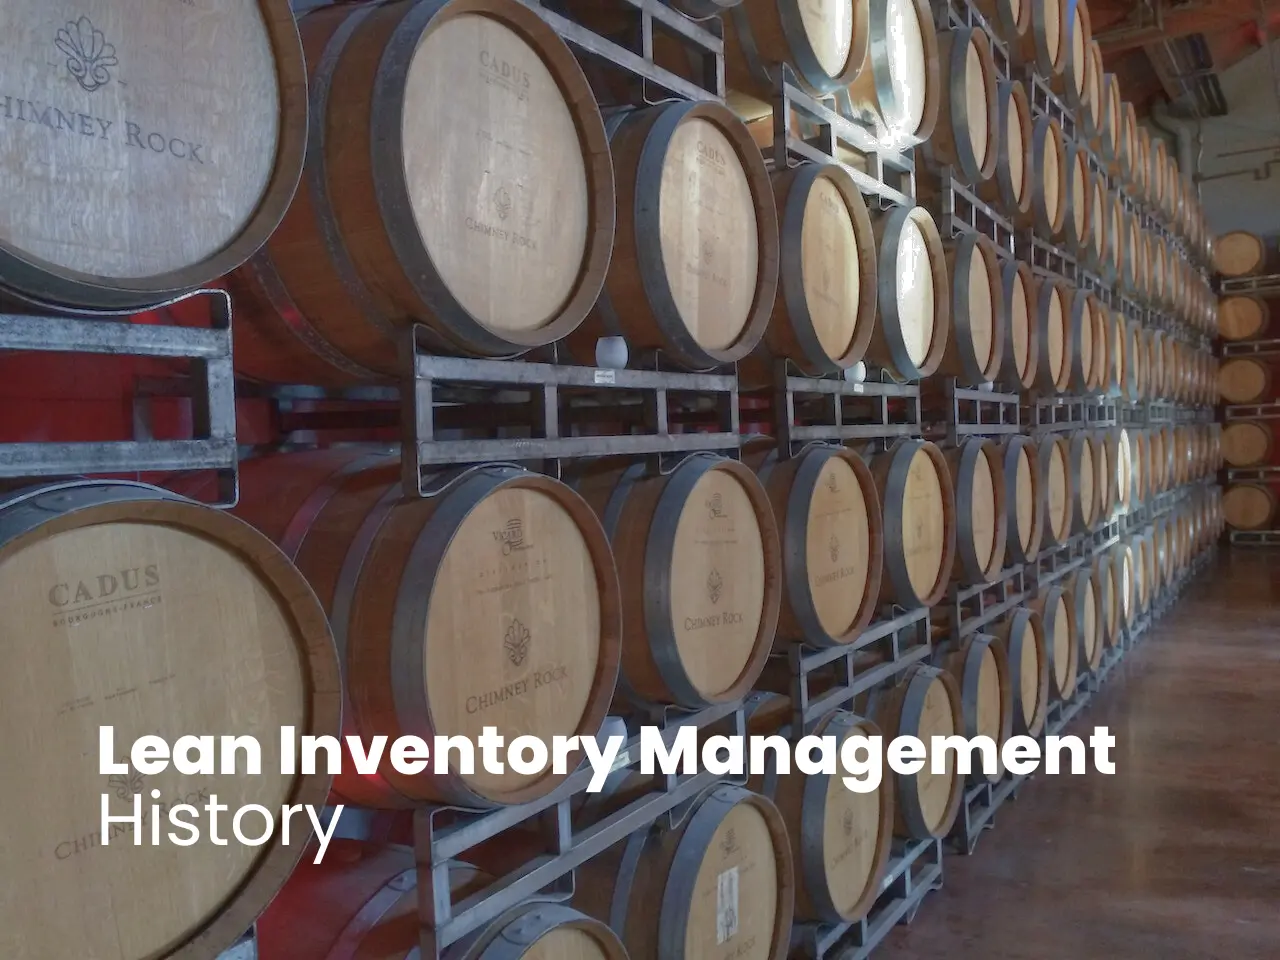 Lean Inventory Management History